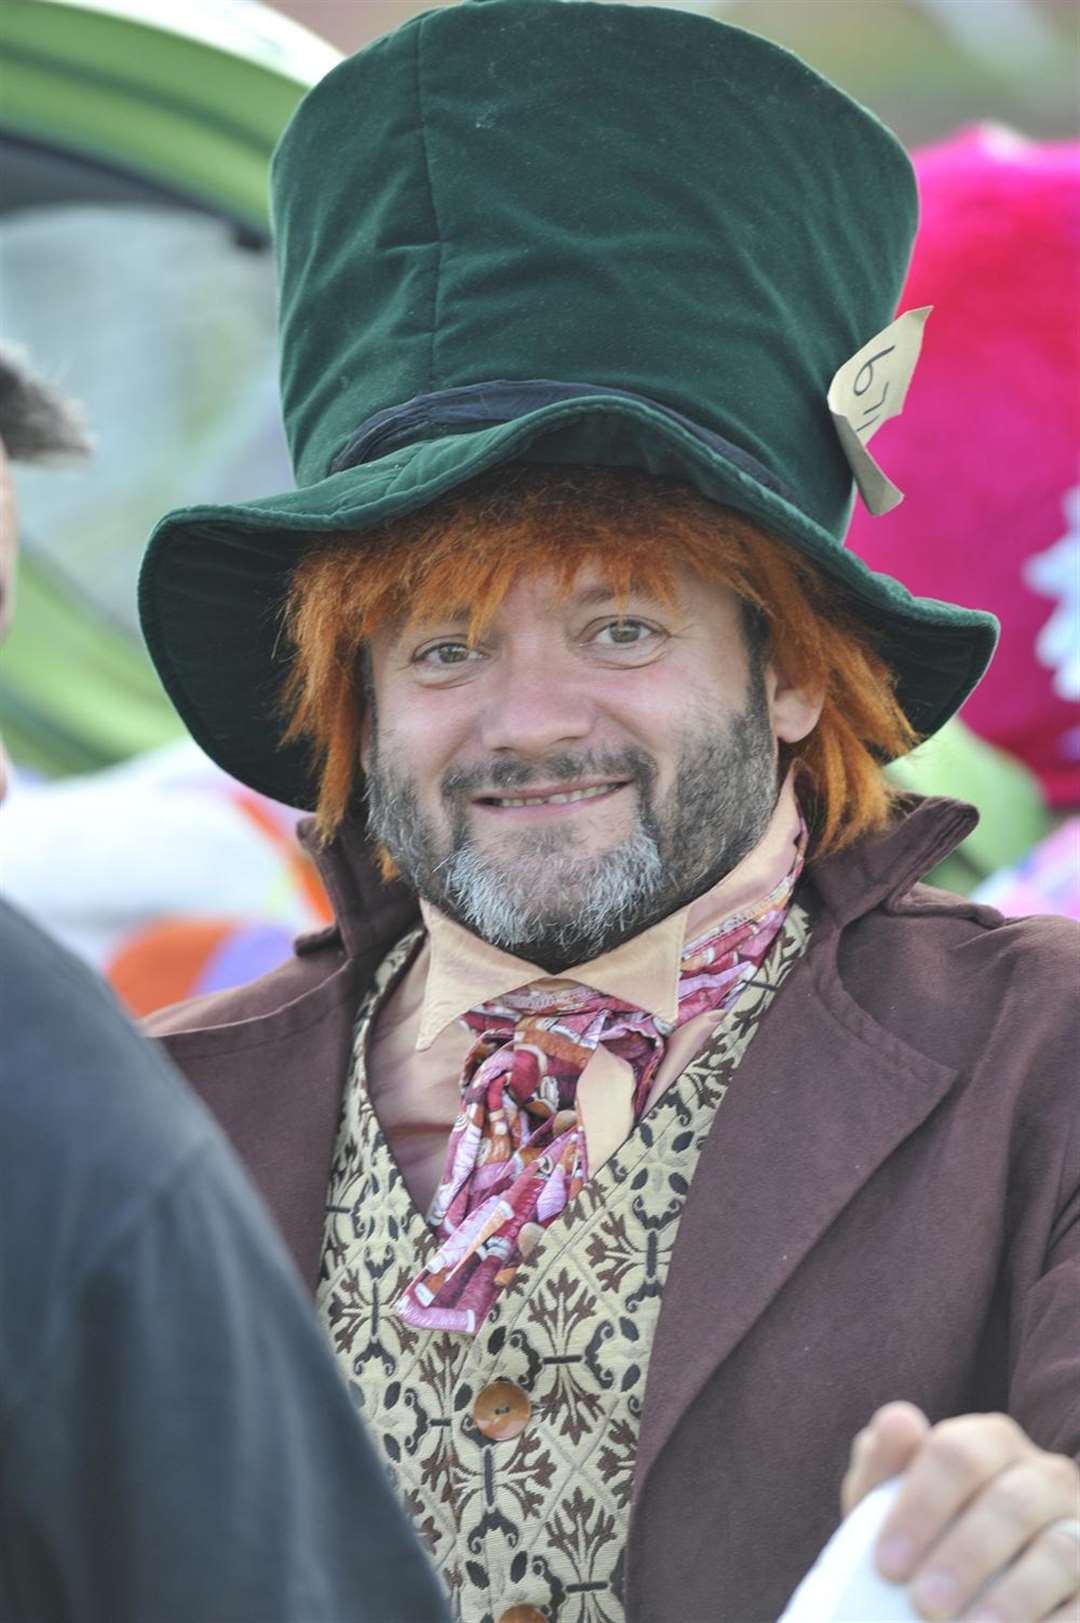 The mad hatter was one of many fancy dress characters at Deal carnival